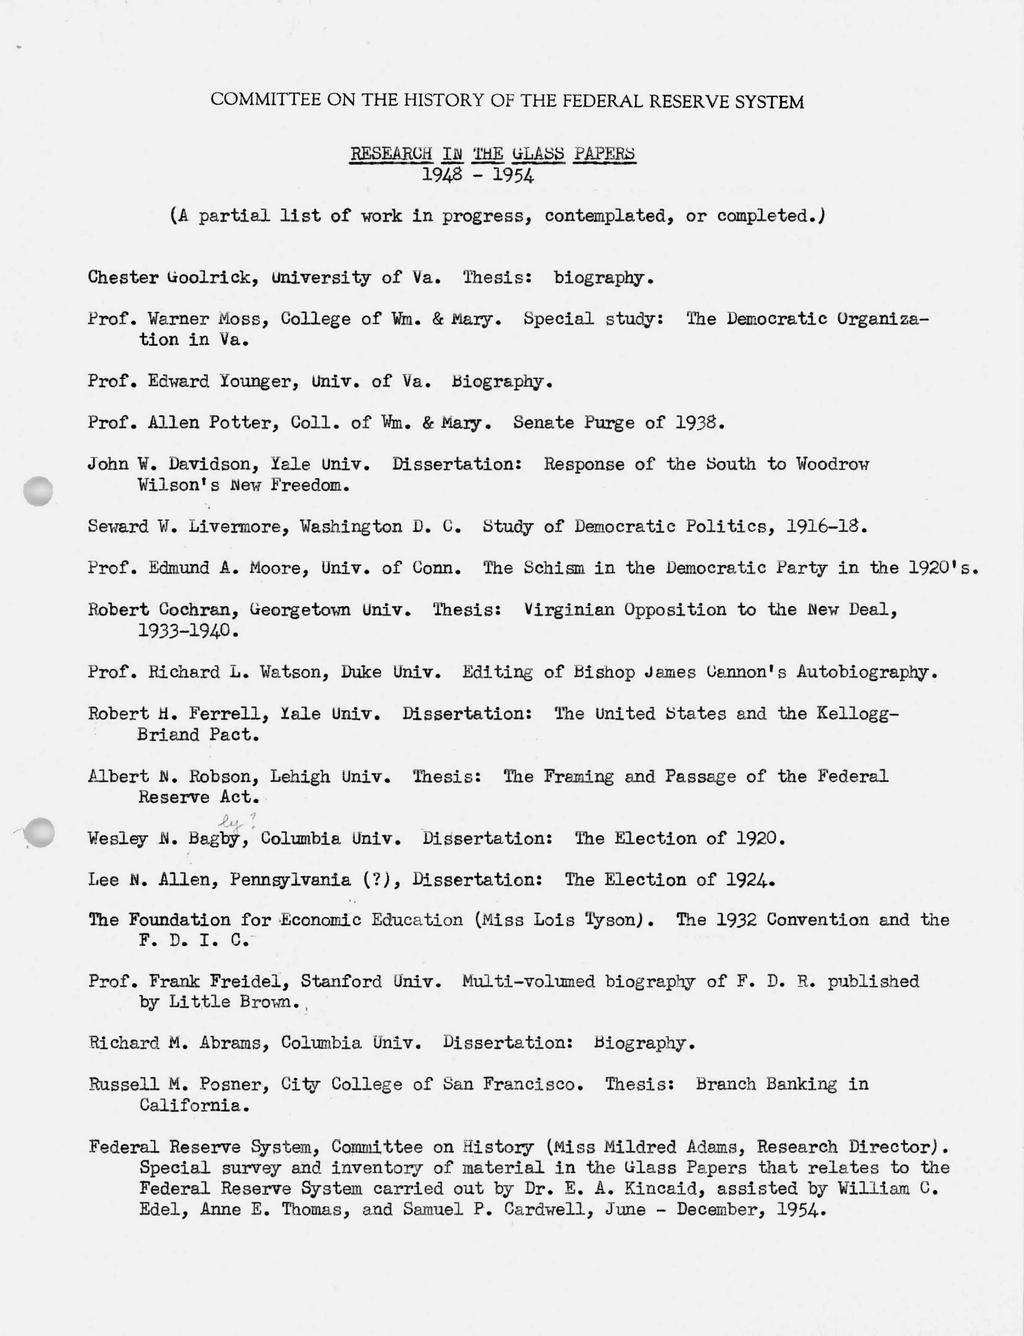 COMMITTEE ON THE HISTORY OF THE FEDERAL RESERVE SYSTEM RESEARCH Ifl THE (ilass PAPERS 194B - 1954- (A partial list of work in progress, contemplated, or completed.) Chester Uoolrick, University of Va.